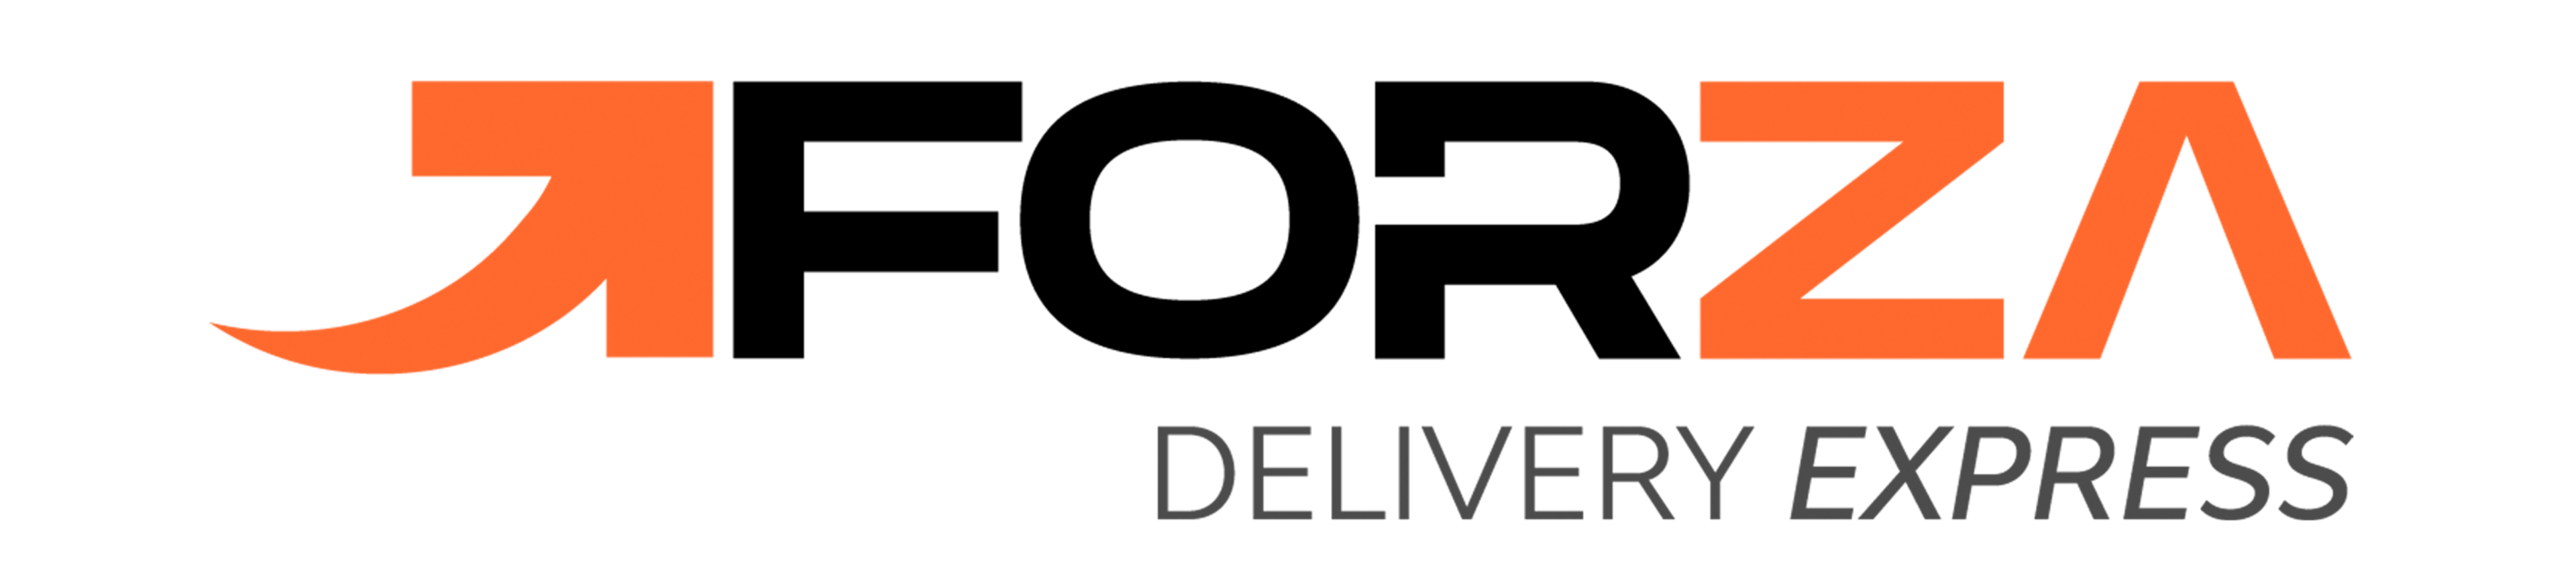 MultiMoney Forza Delivery